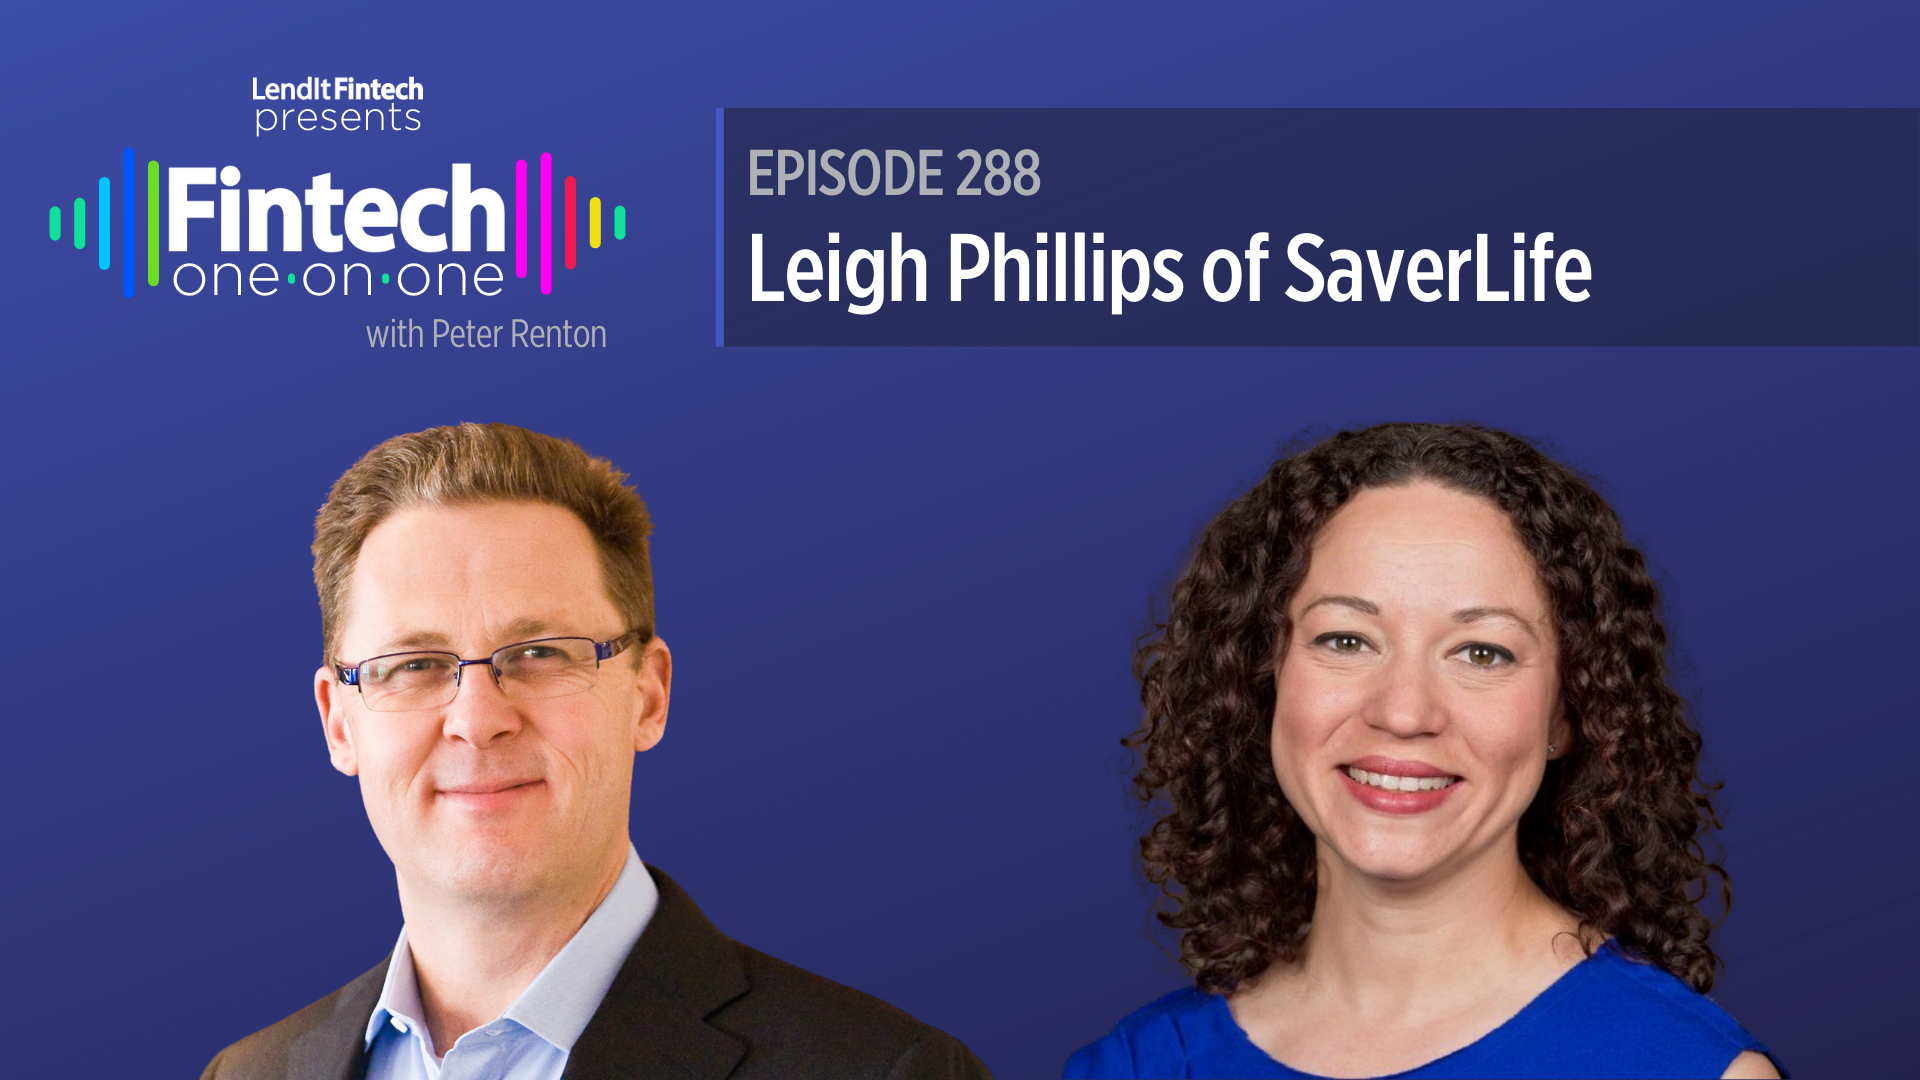 Leigh Phillips, CEO of SaverLife